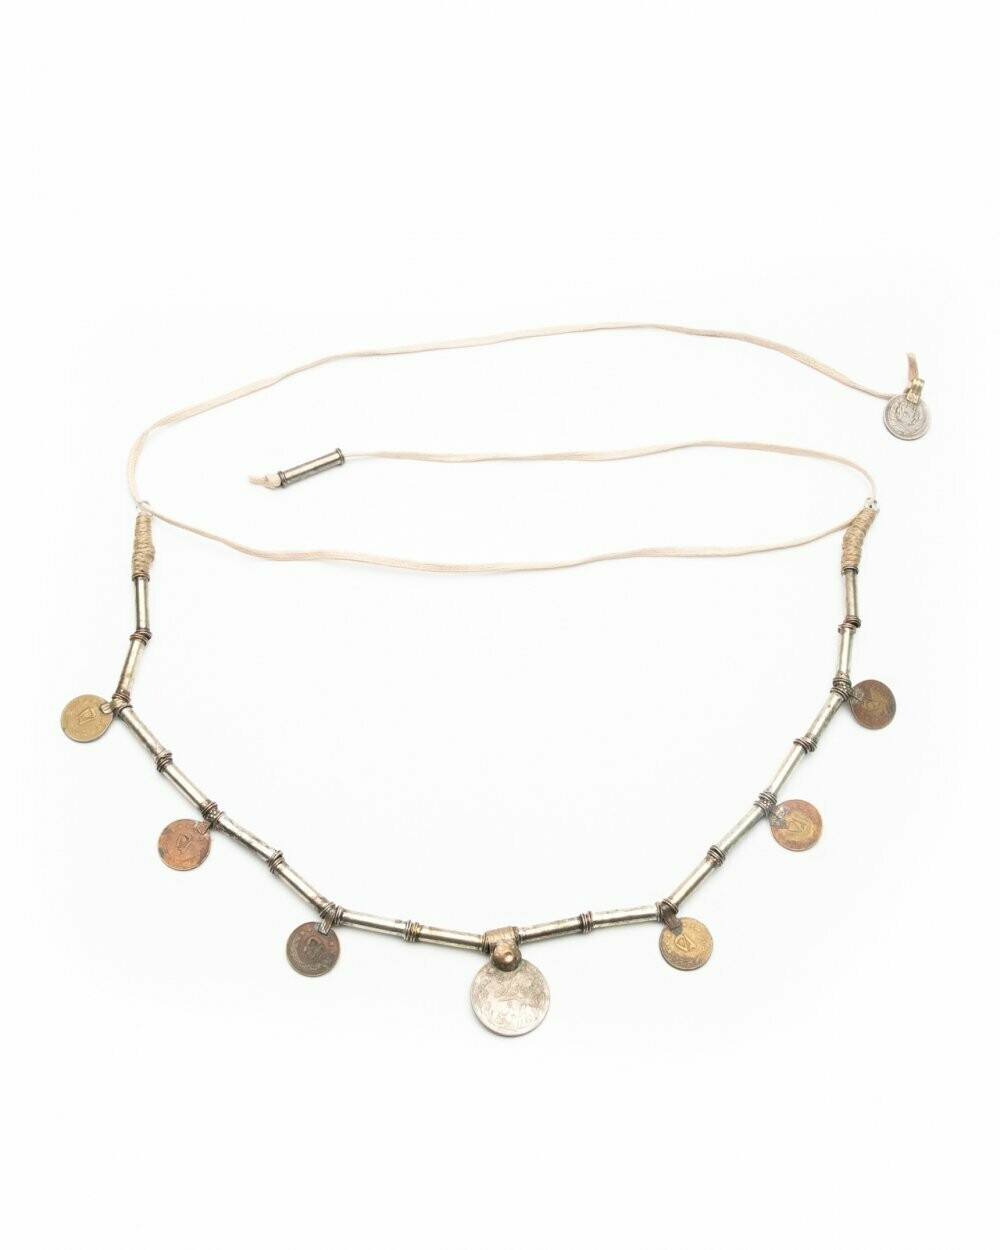 Moost Wanted - Ava Belt/Necklace - Beige